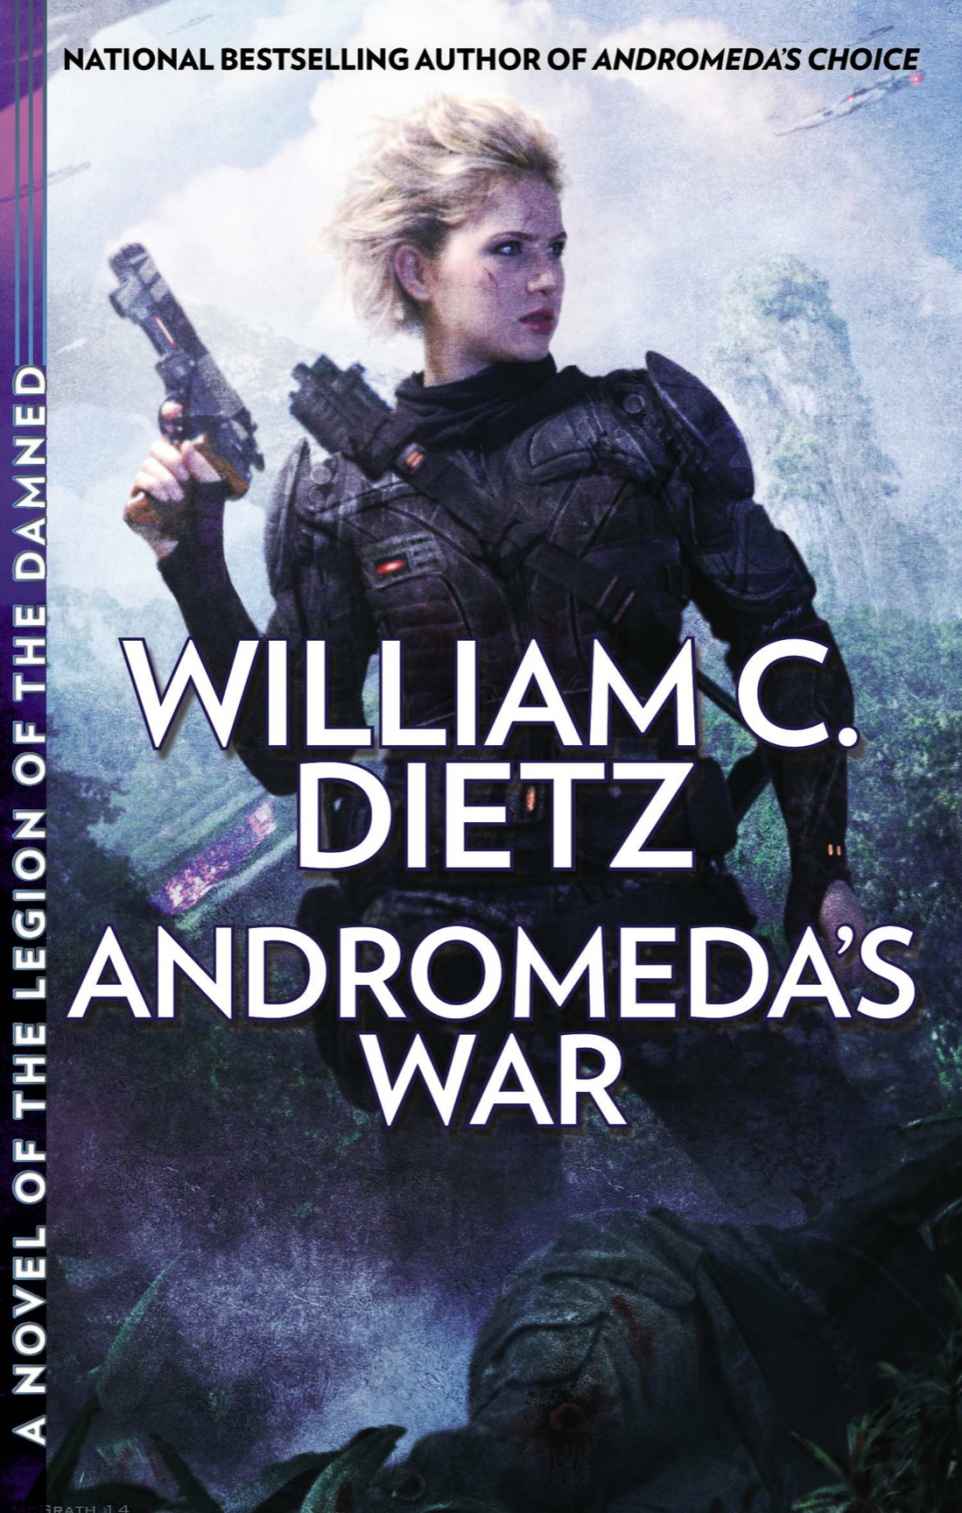 Andromeda's War (Legion of the Damned Book 3) by William C. Dietz